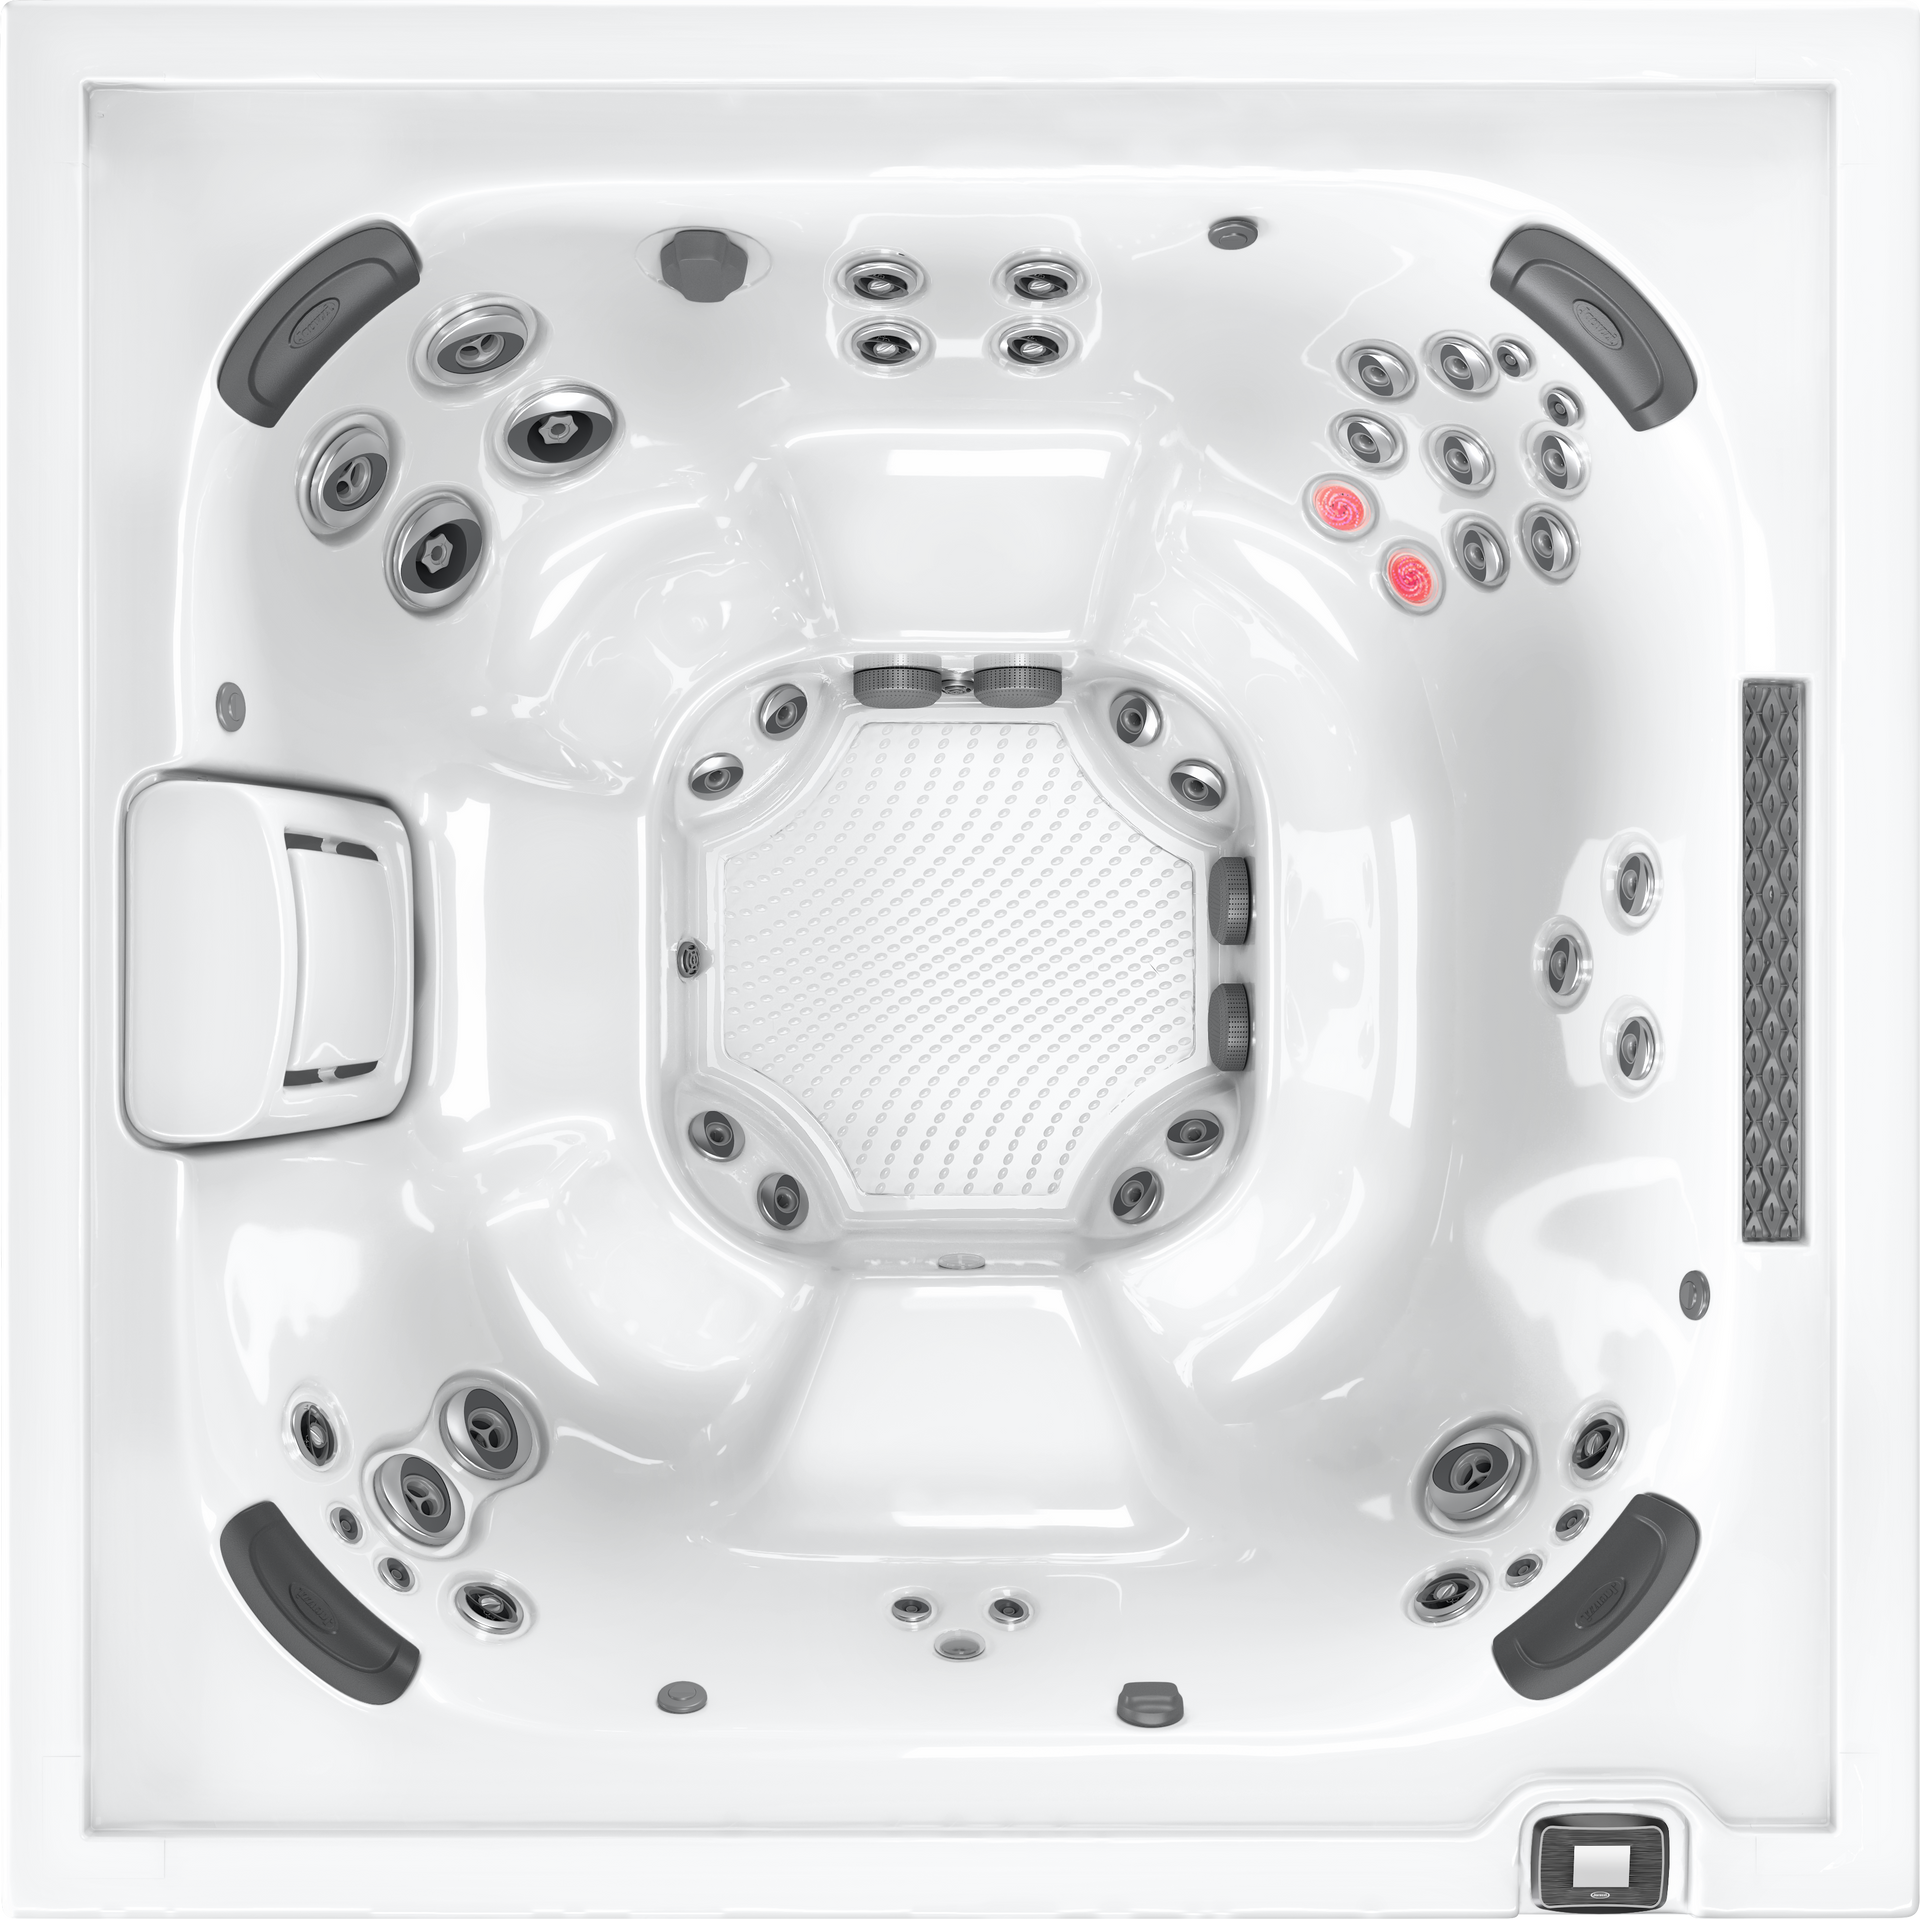 Relax & Unwind With Columbia Pool & Spa's J-LX By Jacuzzi